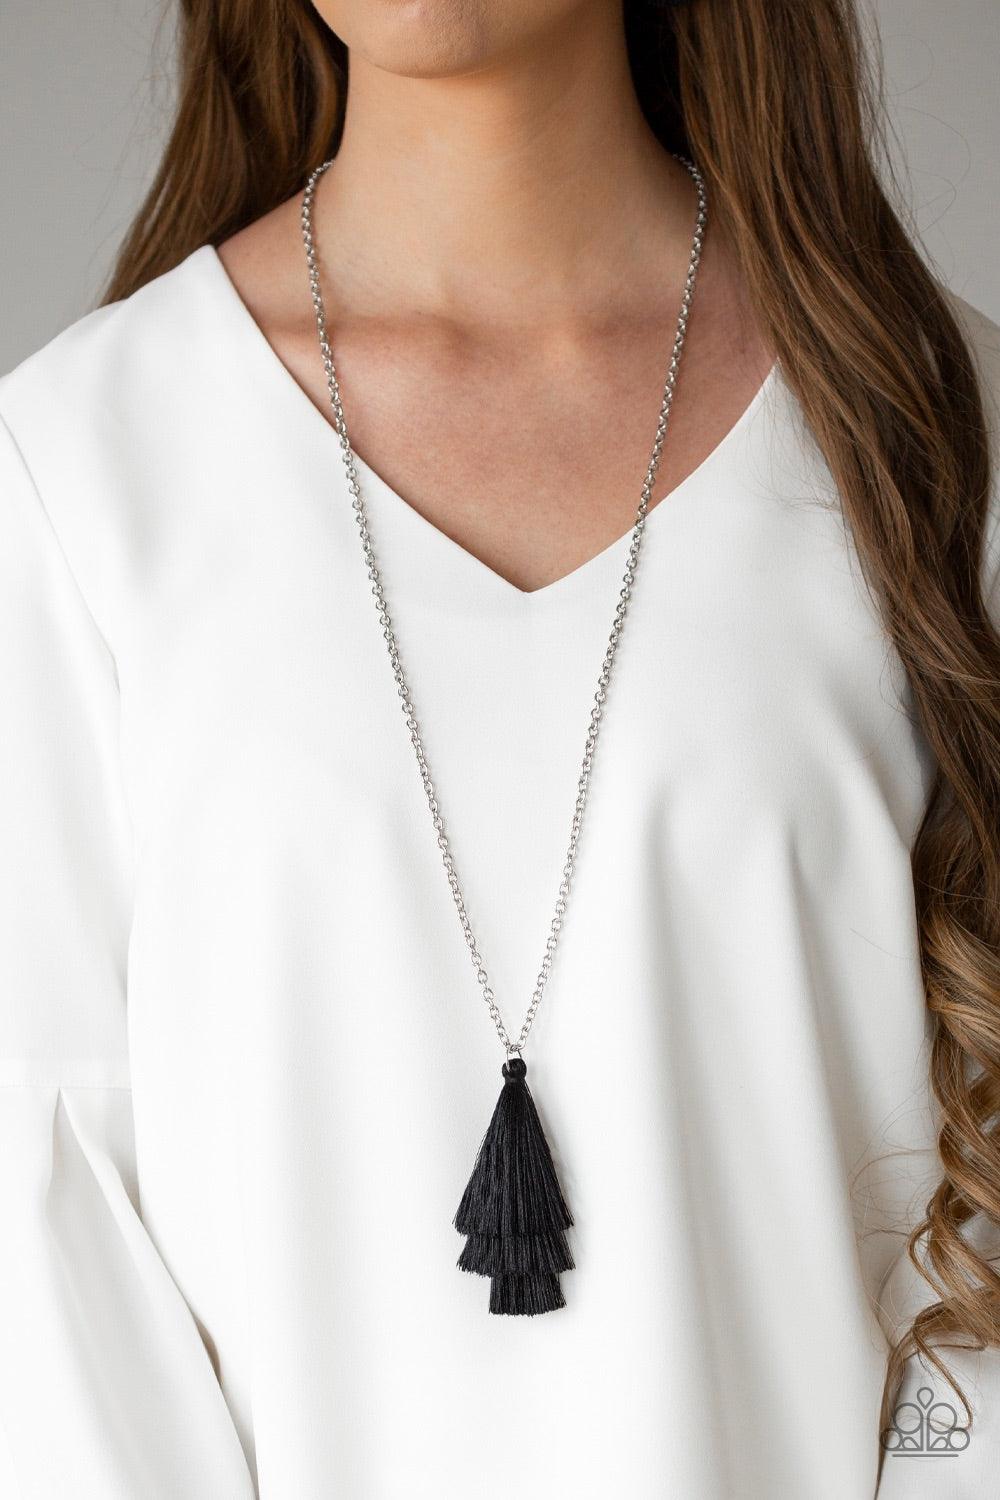 Paparazzi Accessories Triple The Tassel - Black Featuring shimmery black thread, a 3-tiered tassel swings from the bottom of a lengthened silver chain for a colorful, wanderlust vibe. Features an adjustable clasp closure. Jewelry